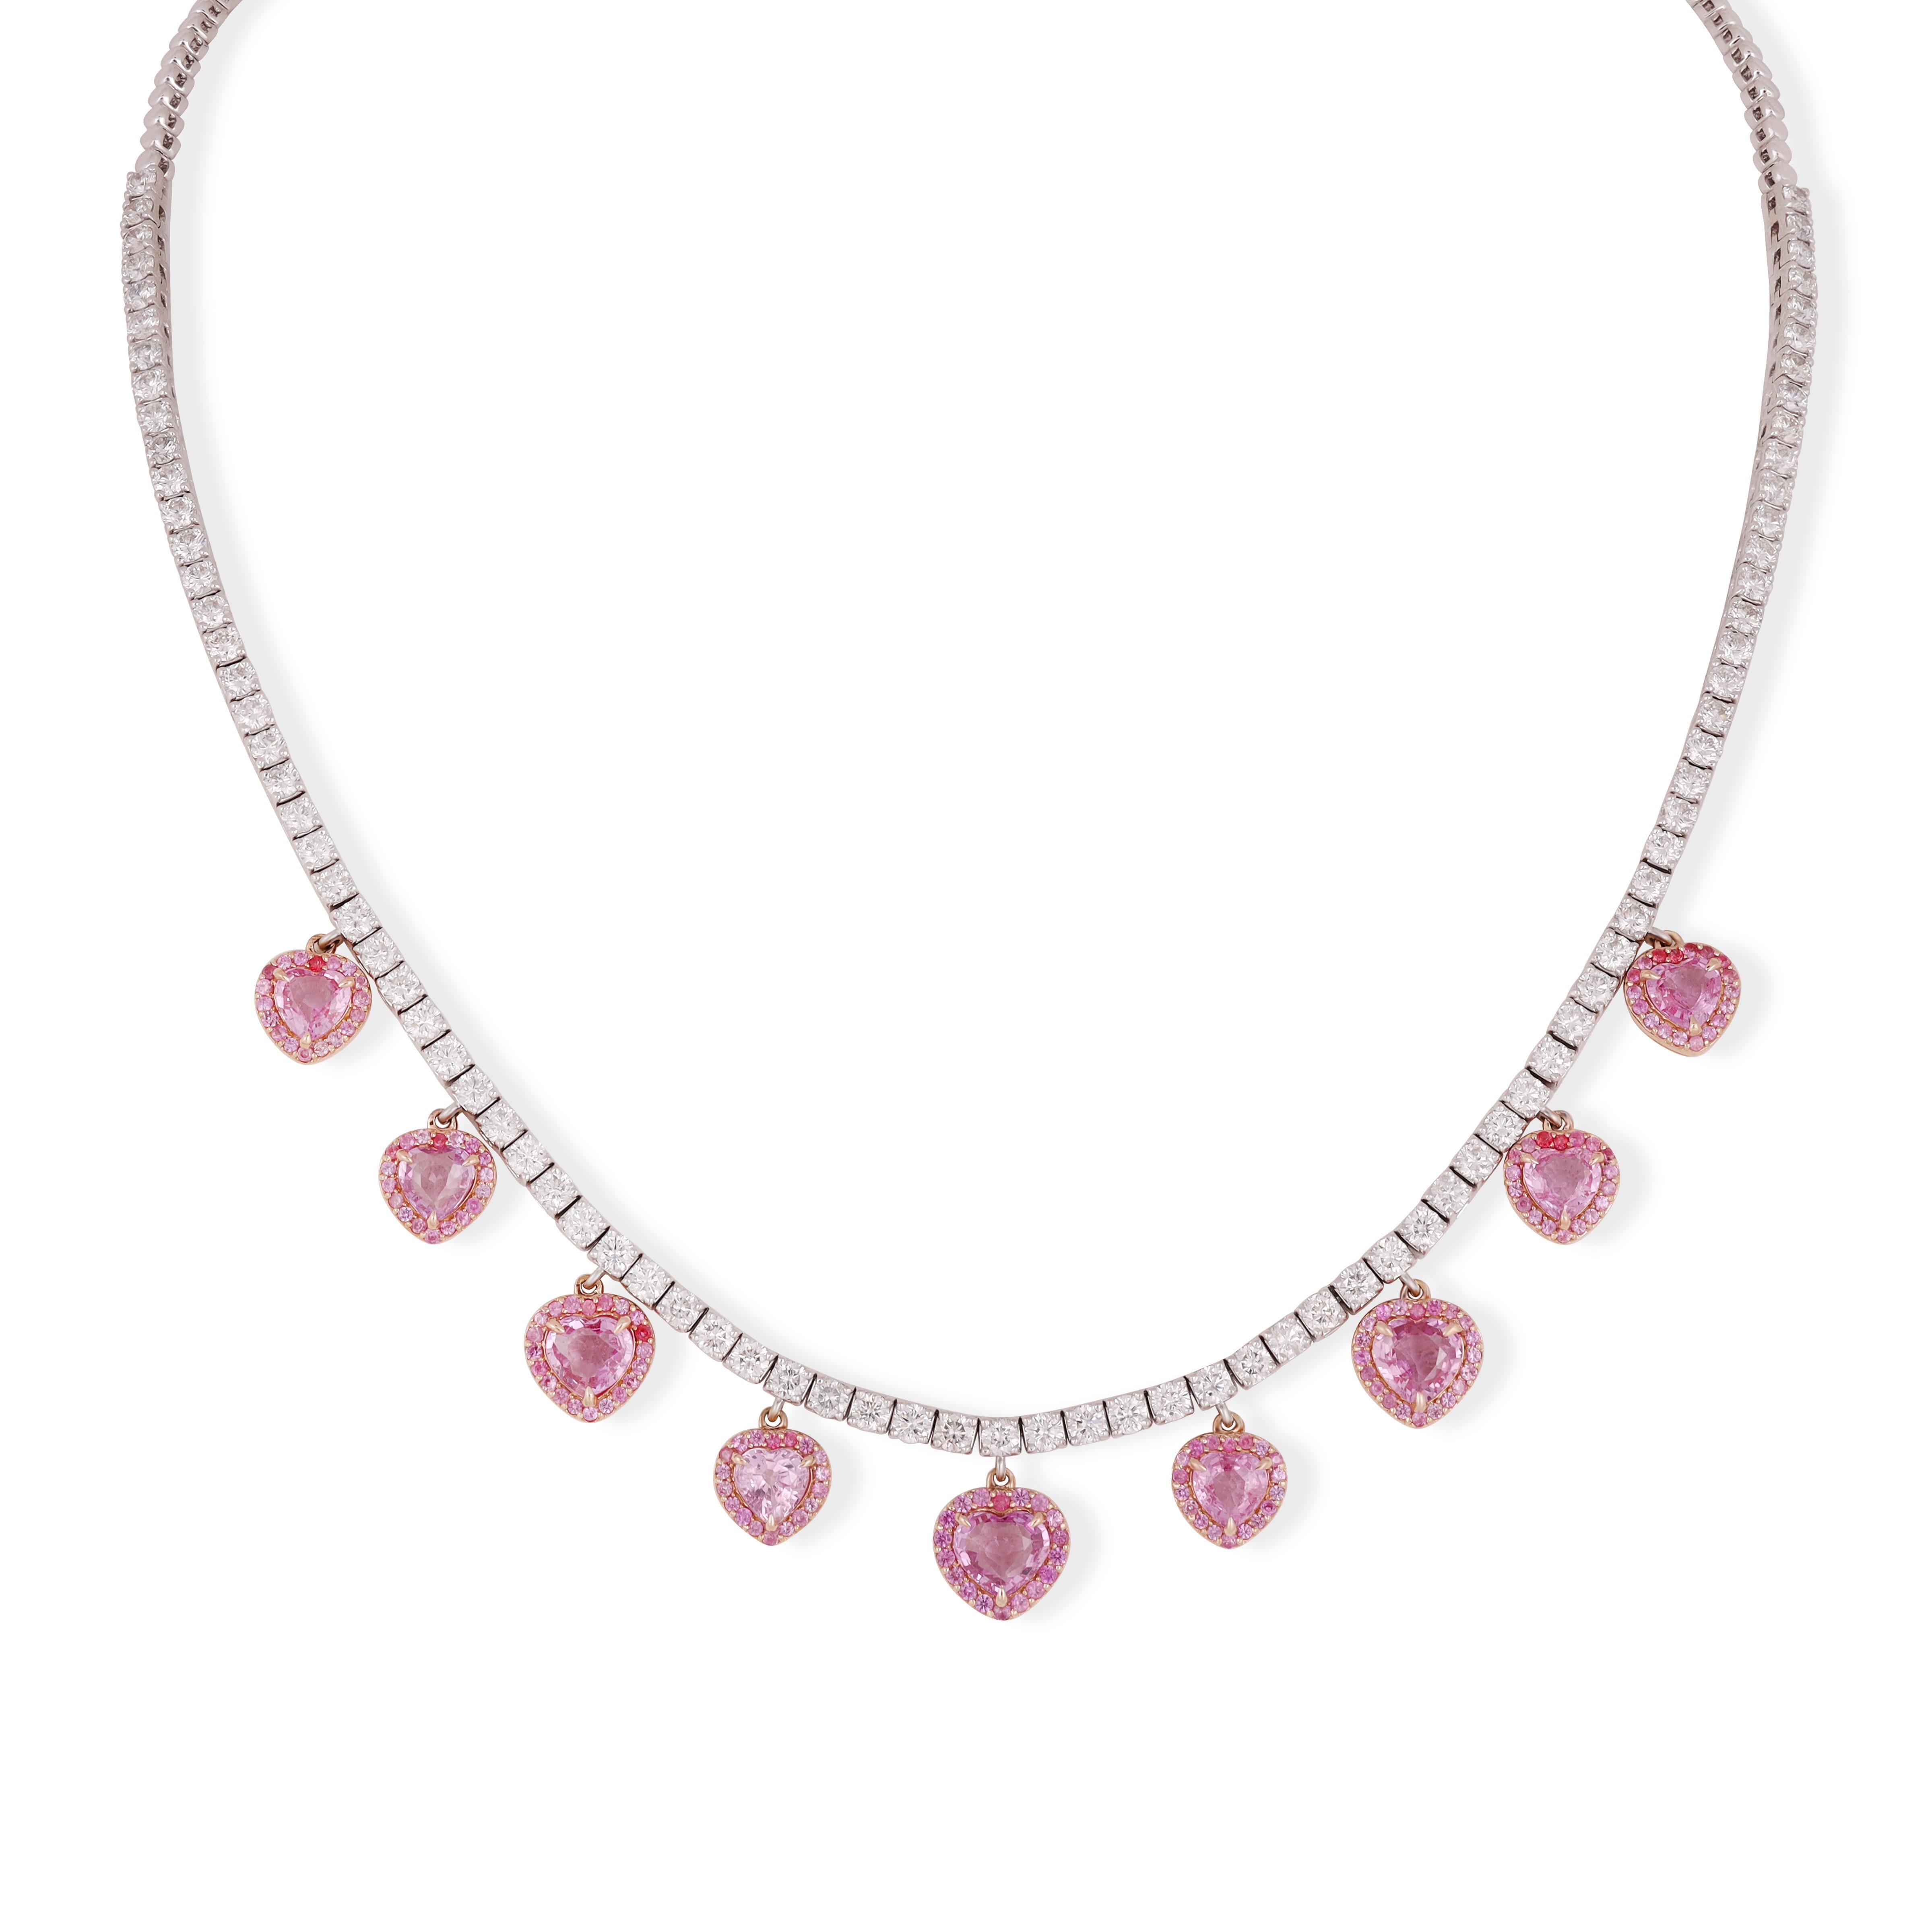 Modernist 6.59 Carat Pink Sapphire & Diamond Chain Necklace in 18k White Gold For Sale